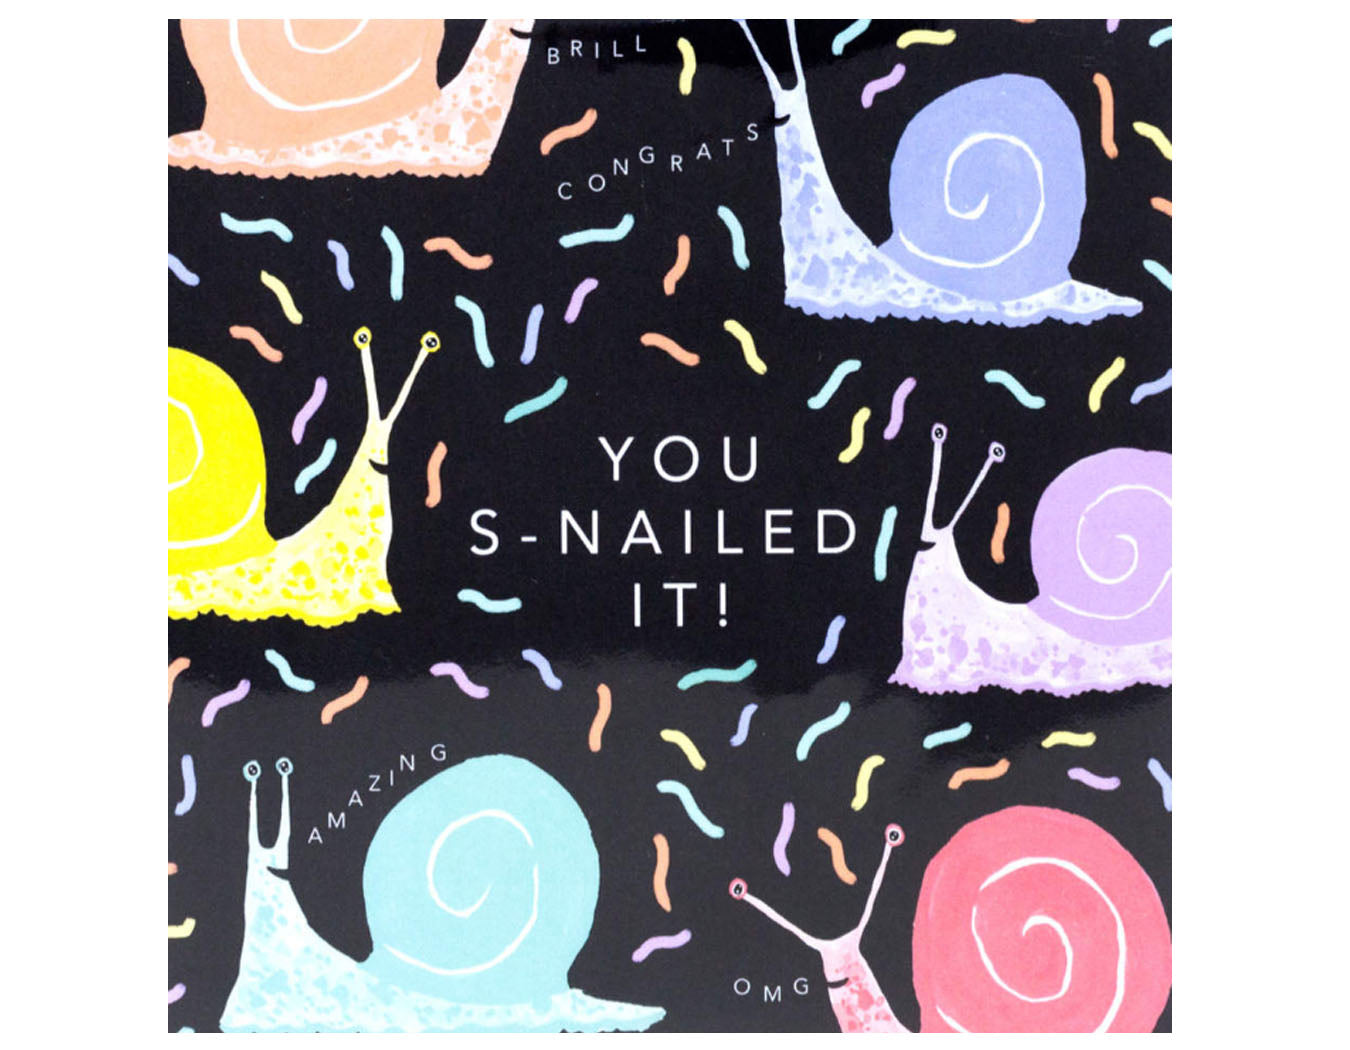 black background colorful snails text reads you snailed it!